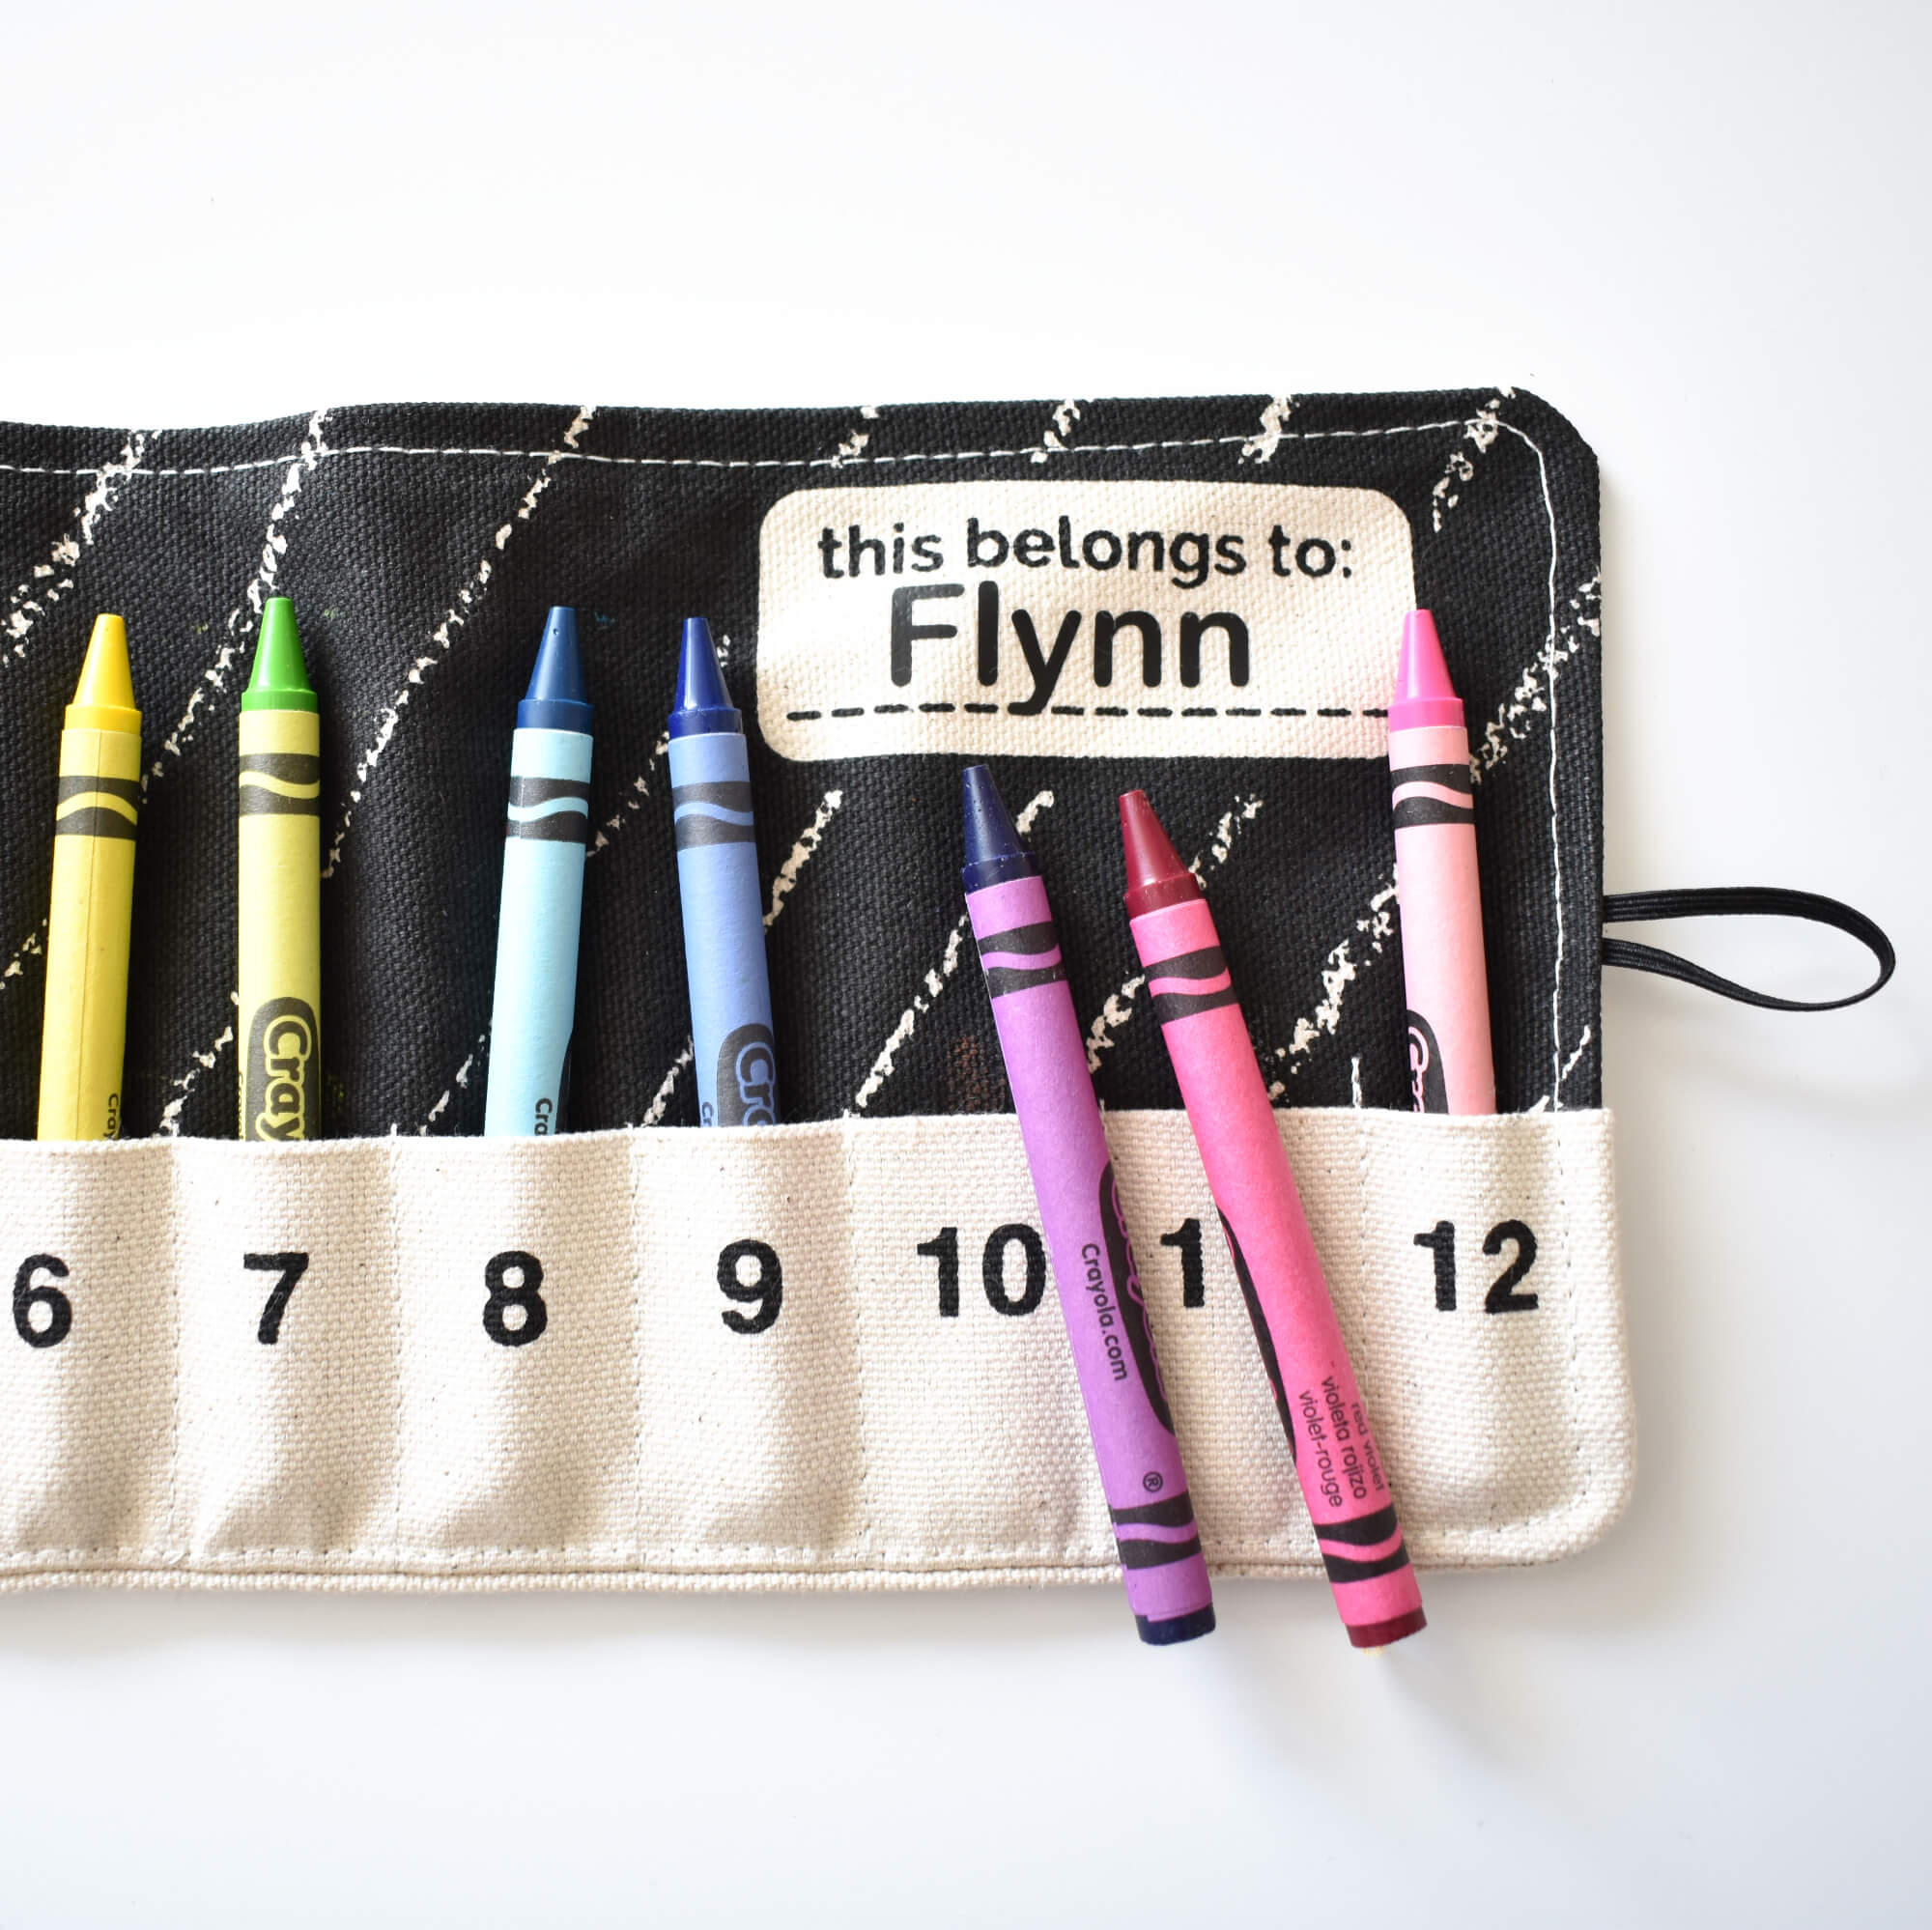 Crayon Holder: A great idea for the young or older traveler!